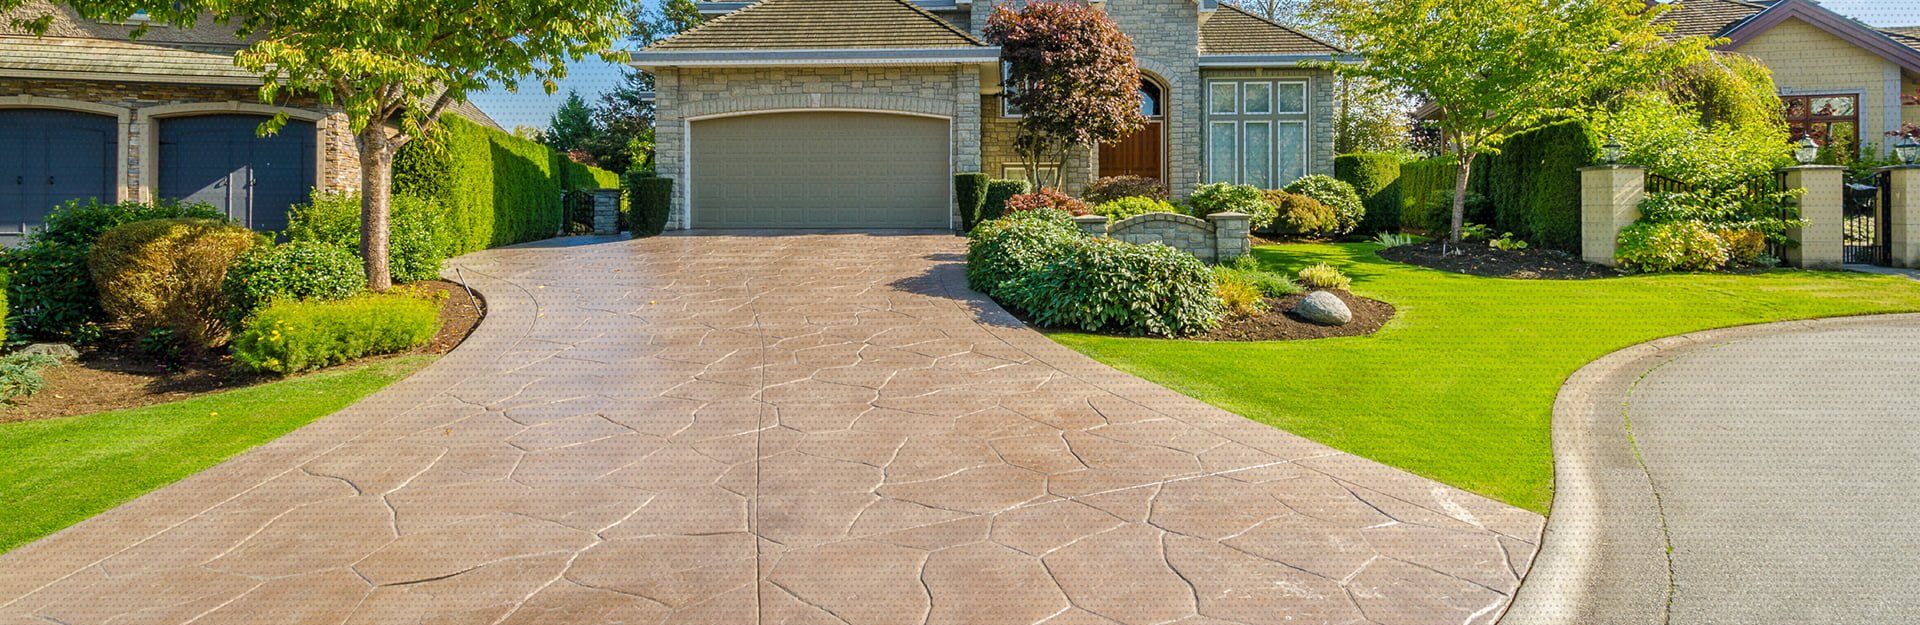 An amazing design done by AM Contracting on a residential driveway that makes the driveway stand out more than ever for a residential home.